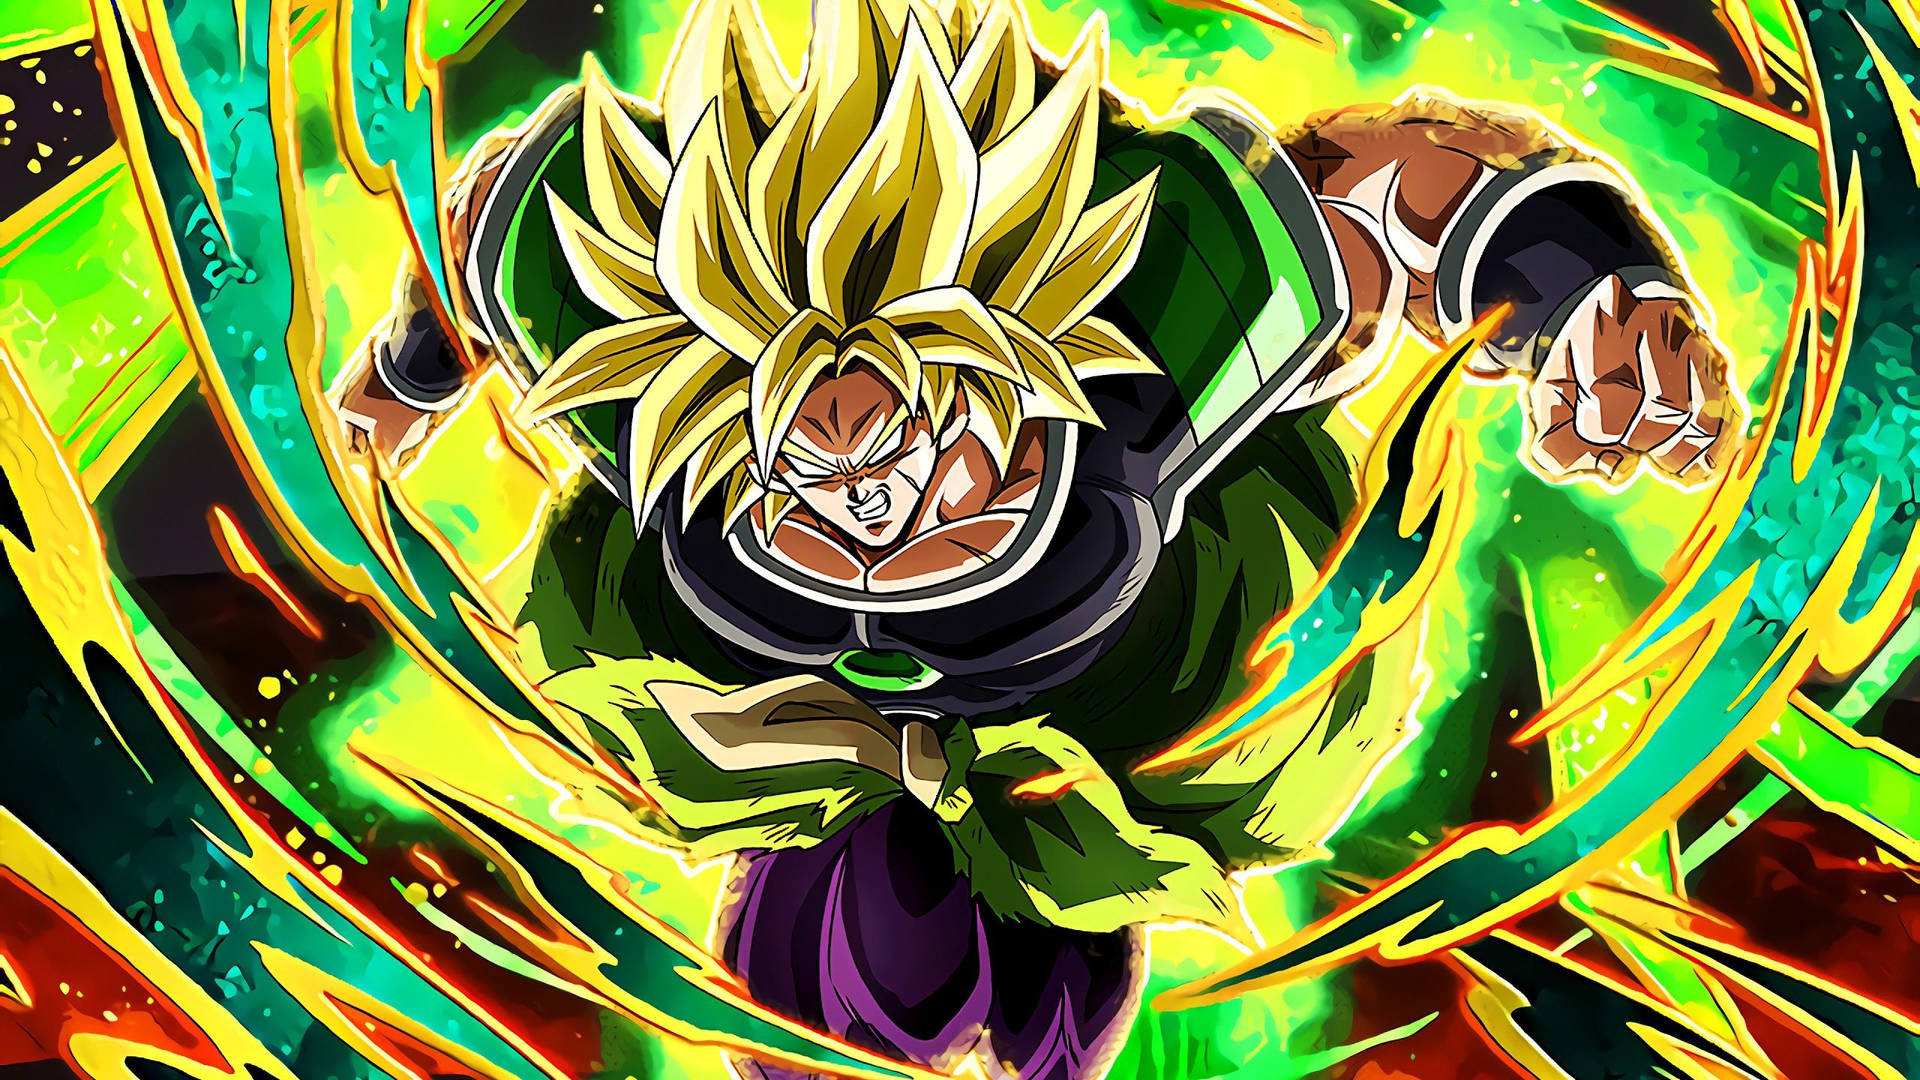 The Legendary Super Saiyan, Broly, is ready for battle. Wallpaper